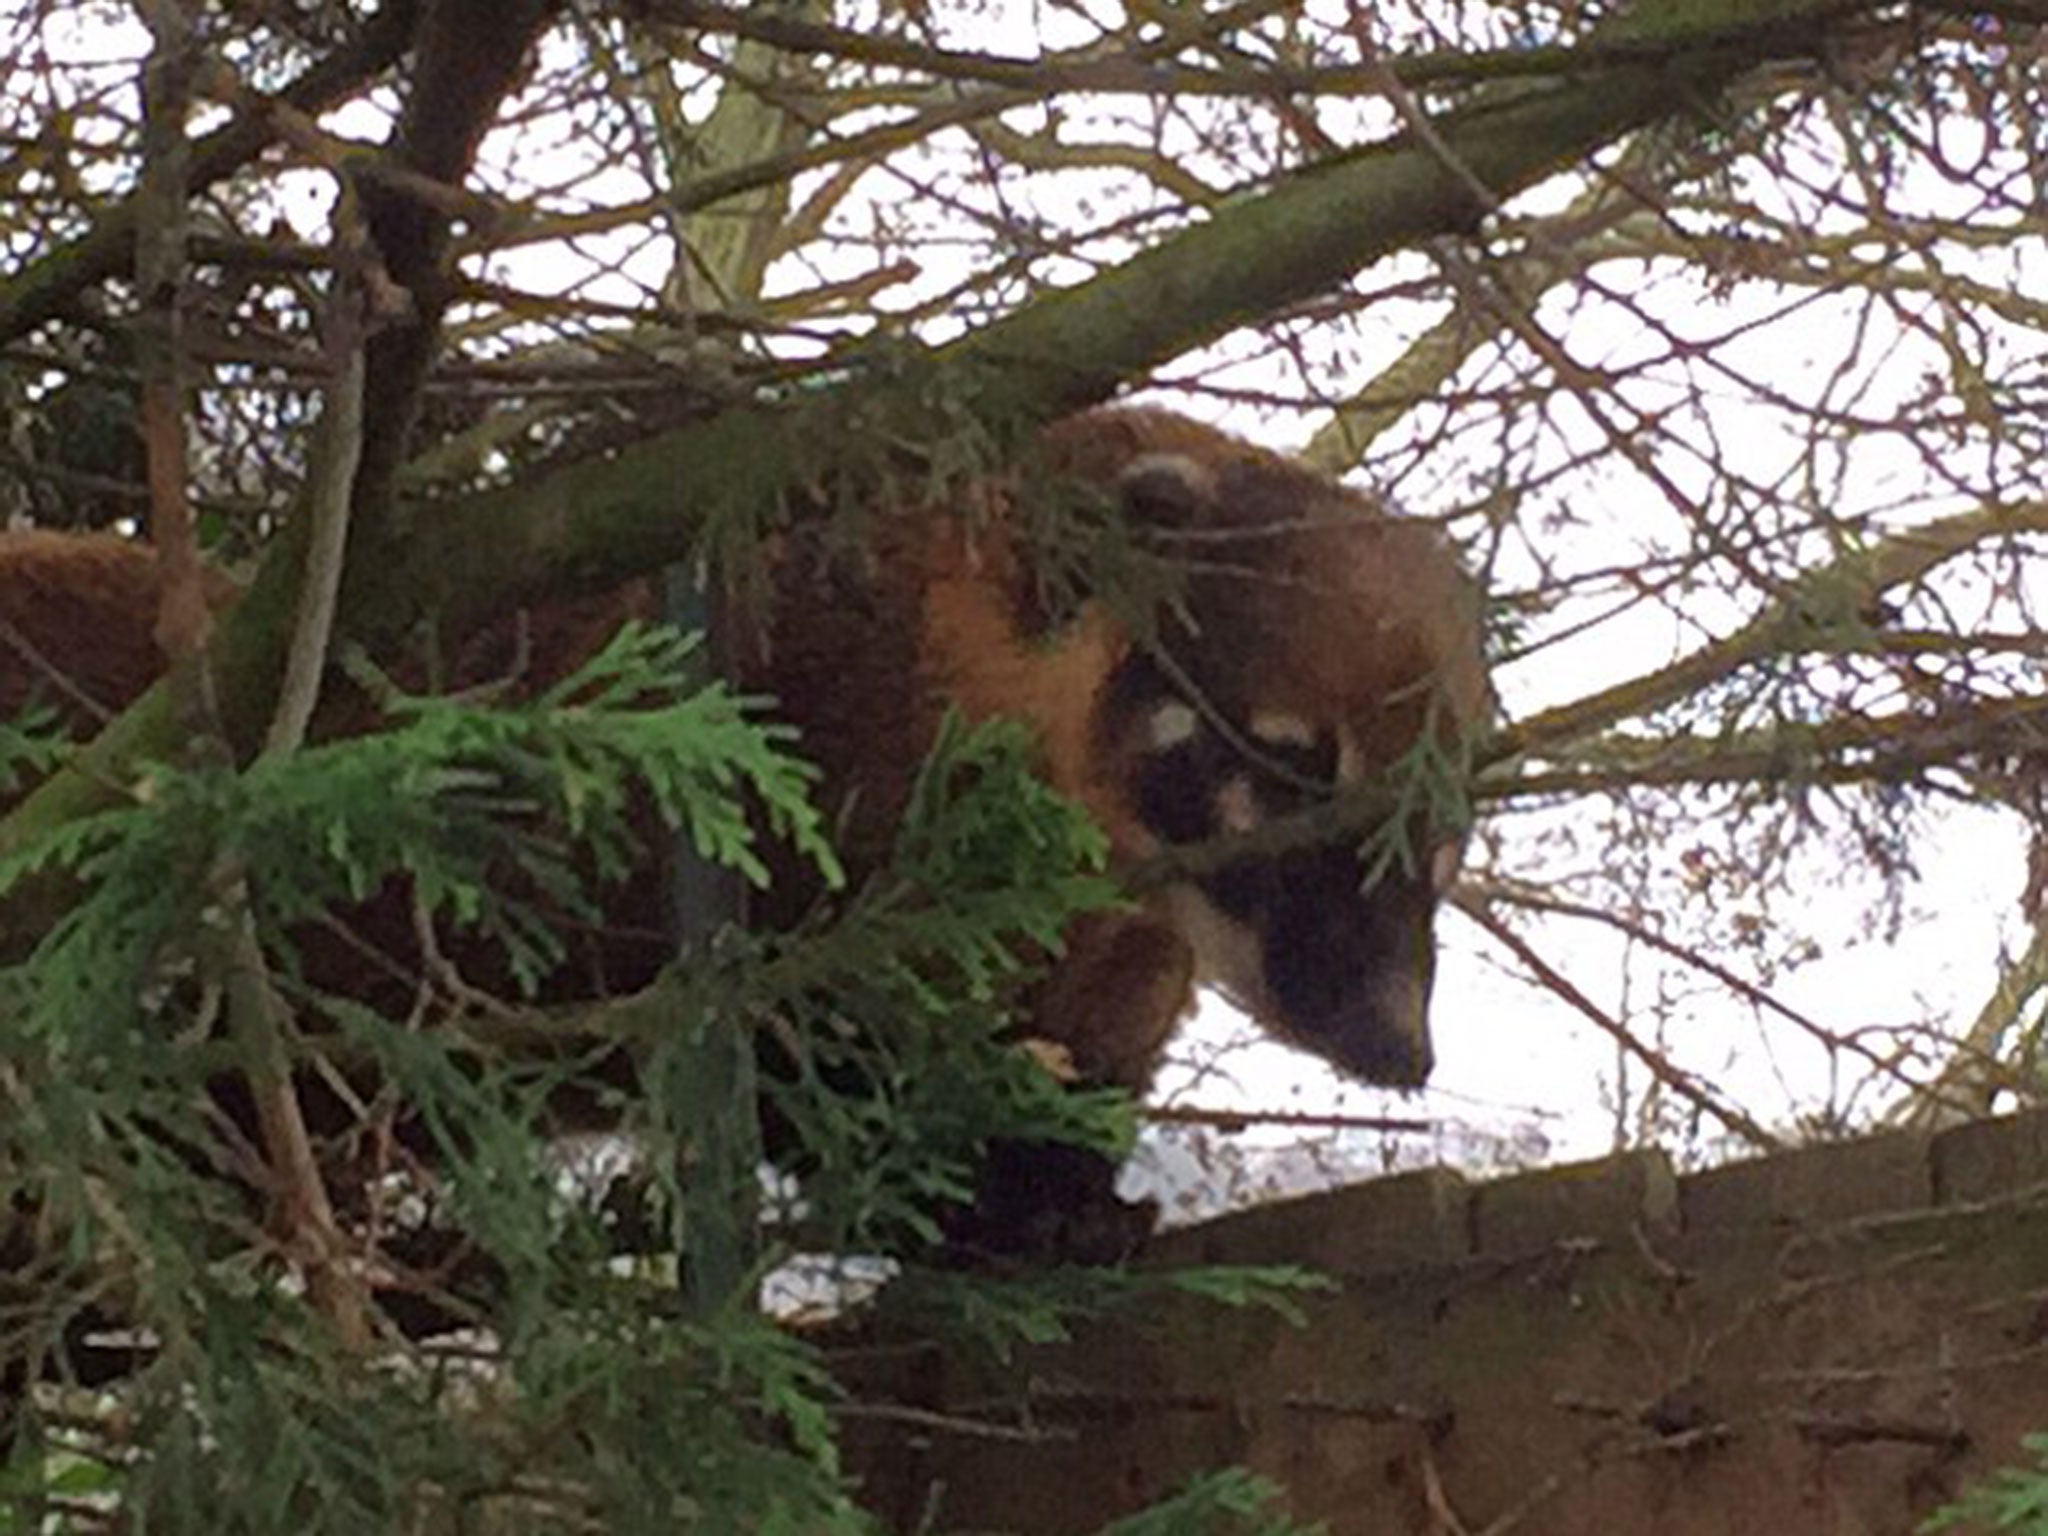 The Coati was spotted climbing a tree in Buckinghamshire